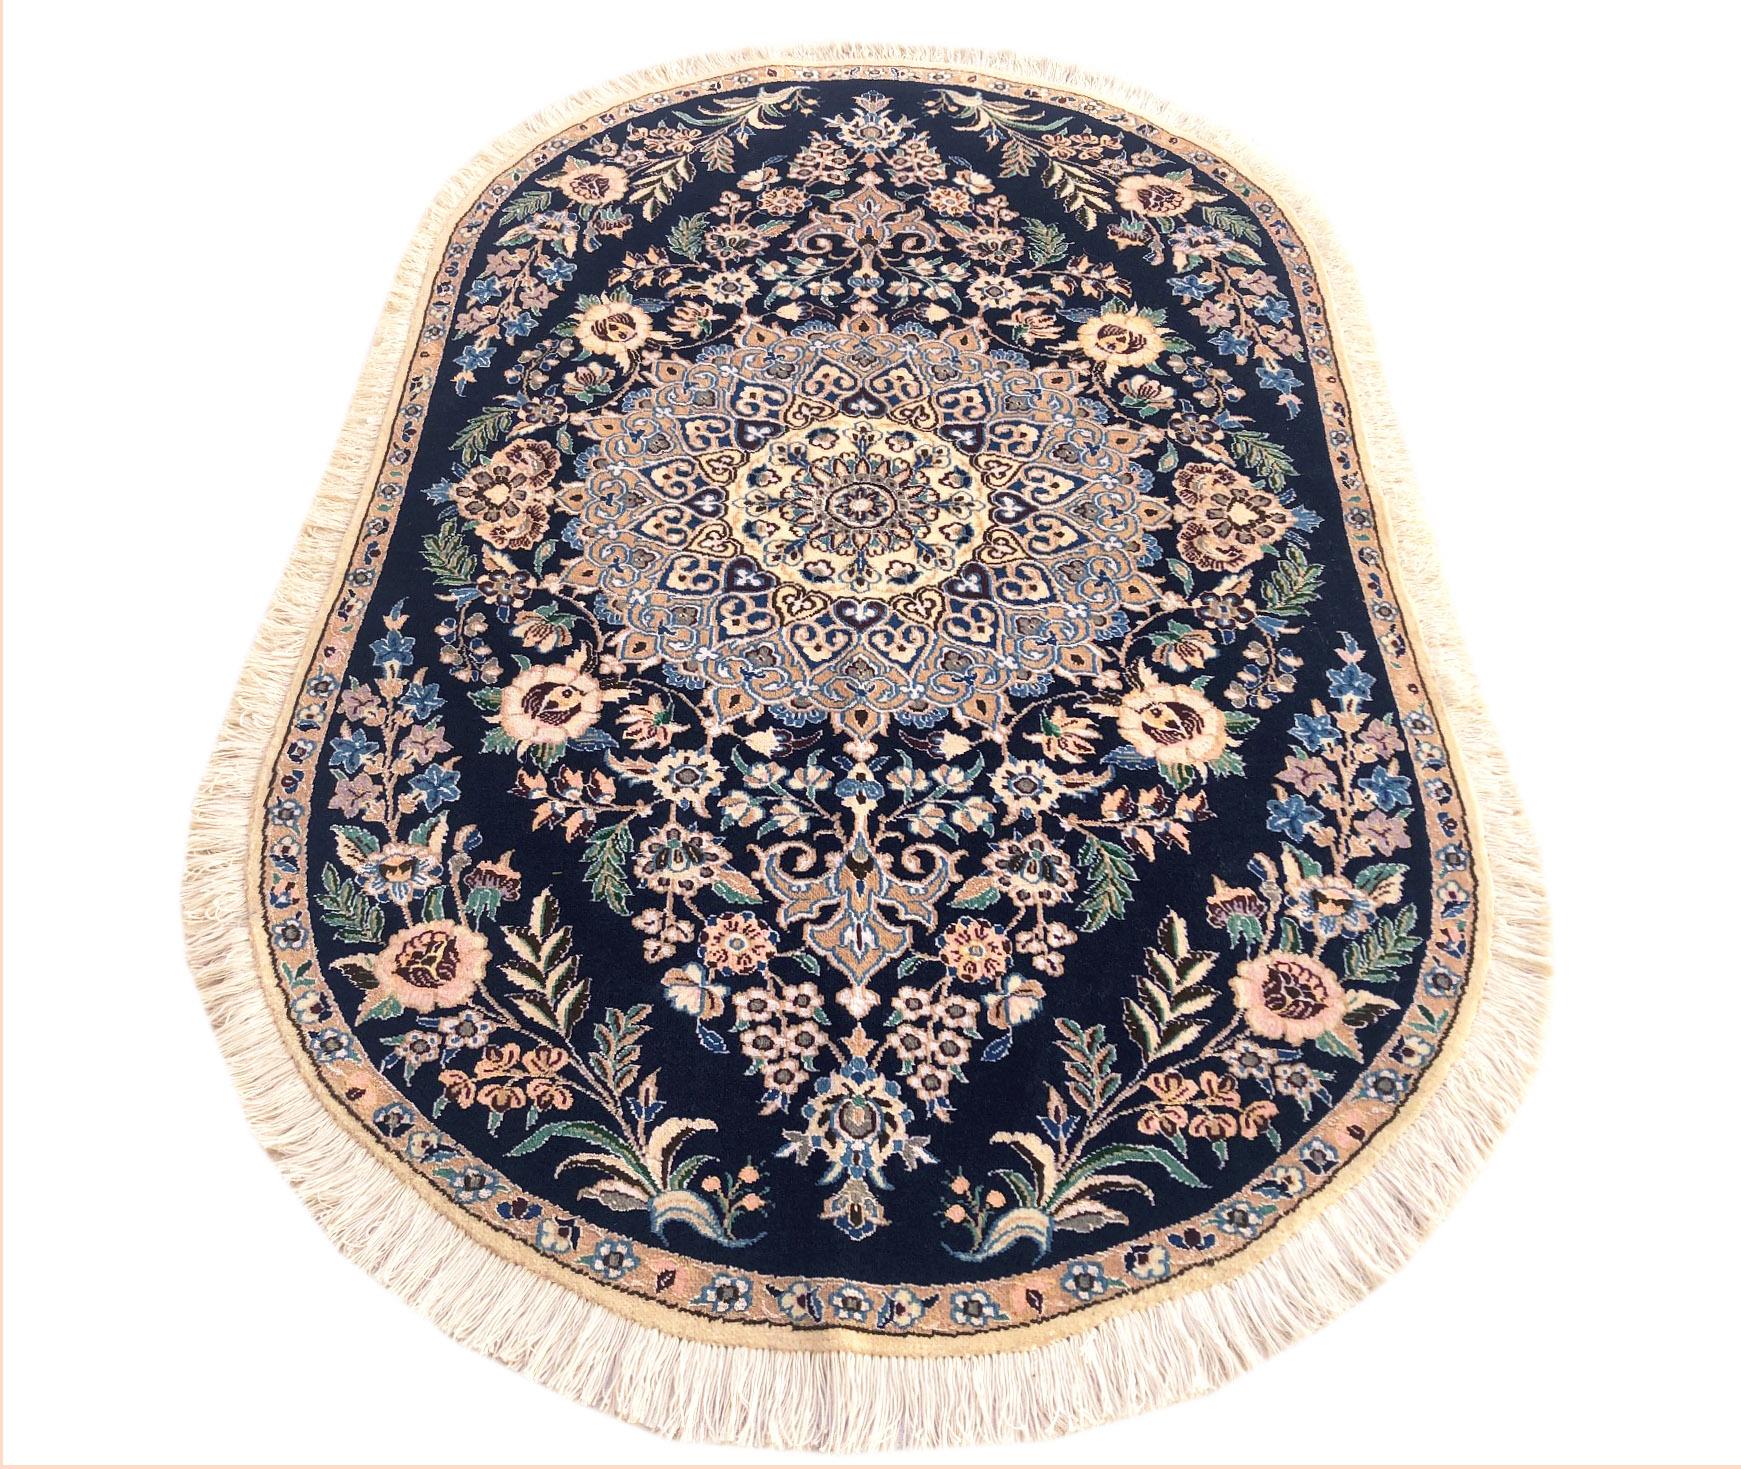 This authentic Persian round handmade Nain (9 LA) rug has wool and silk pile with cotton foundation. Nain is a city in Iran that is well known for producing fine handmade rug. This rug has diamond medallion floral design. The base and border colors